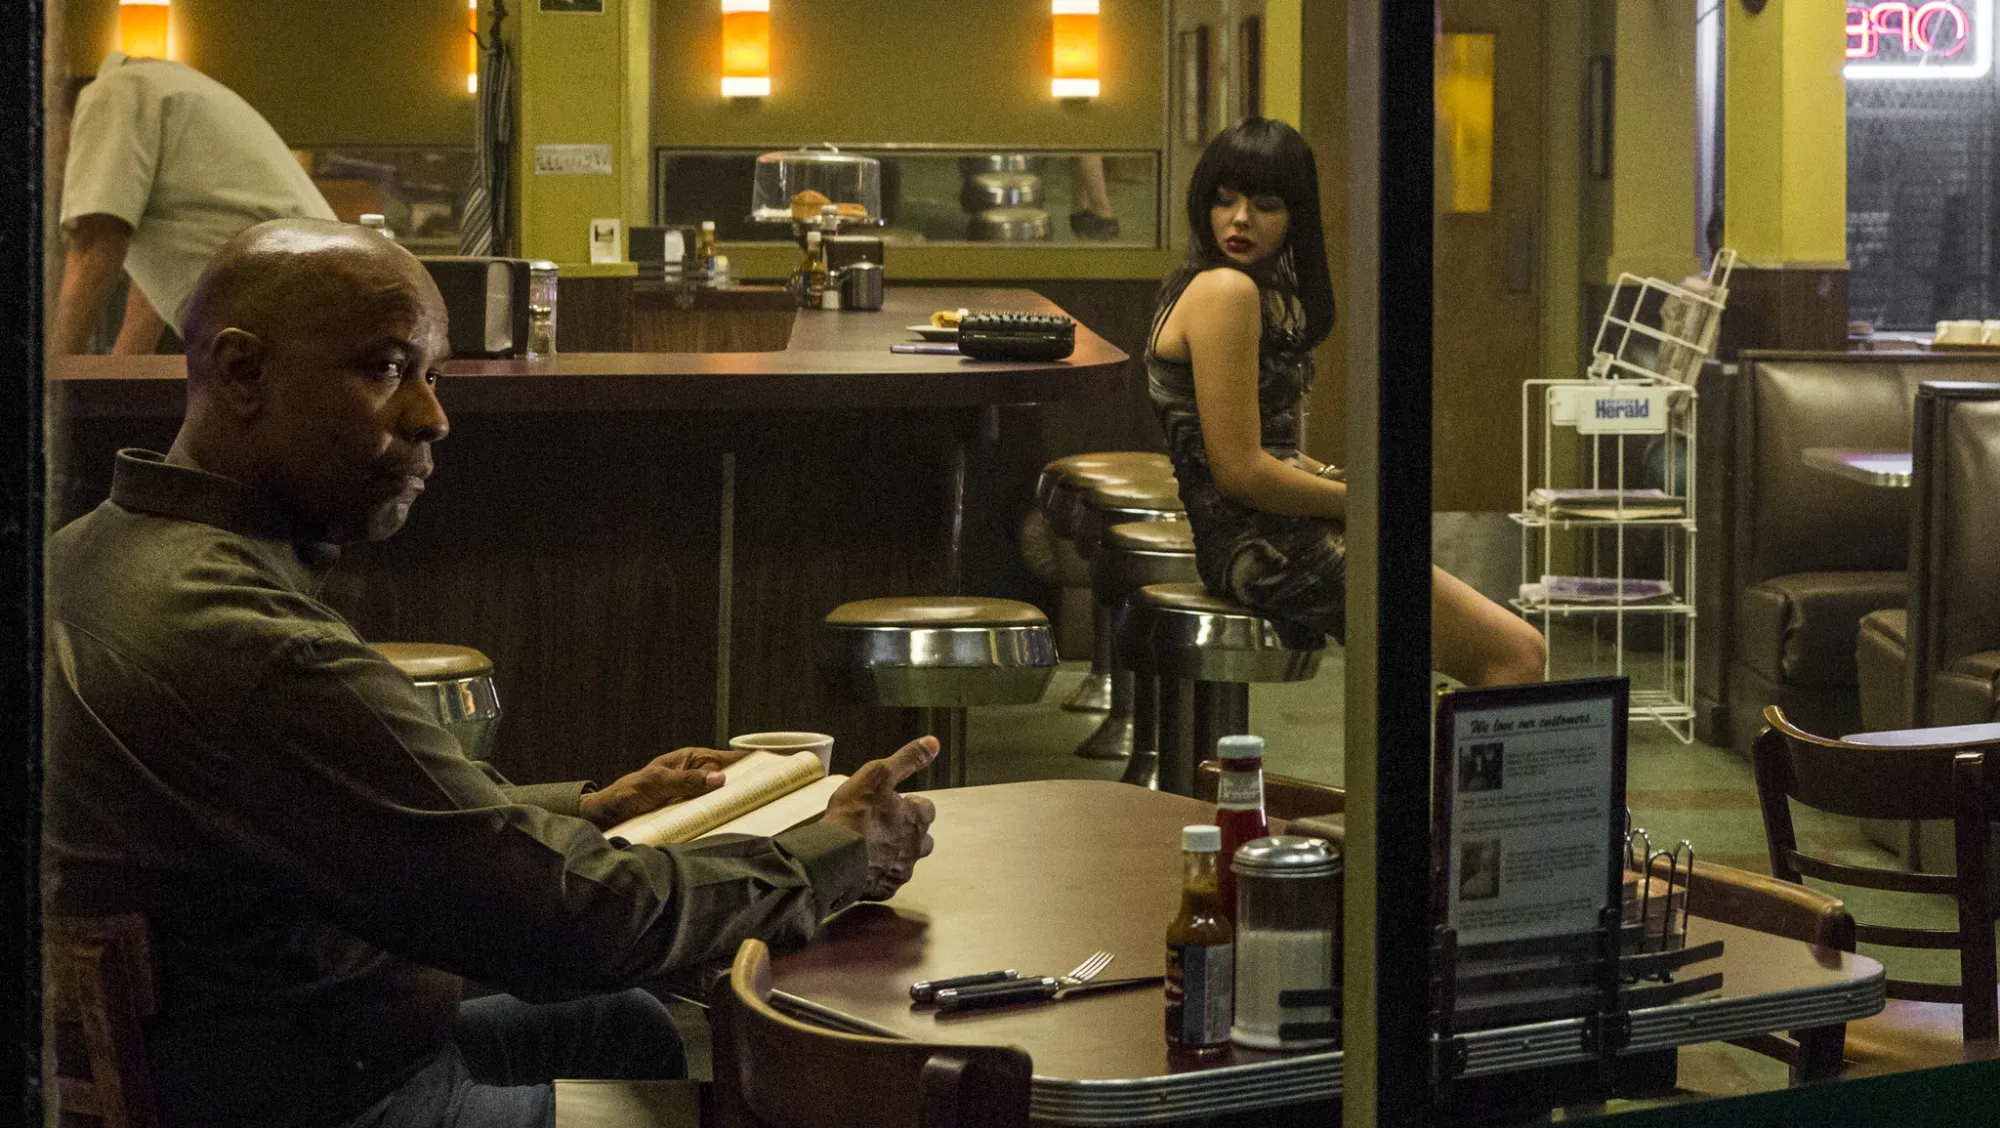 Expectations for Denzel Washington’s Third Outing as The Equalizer